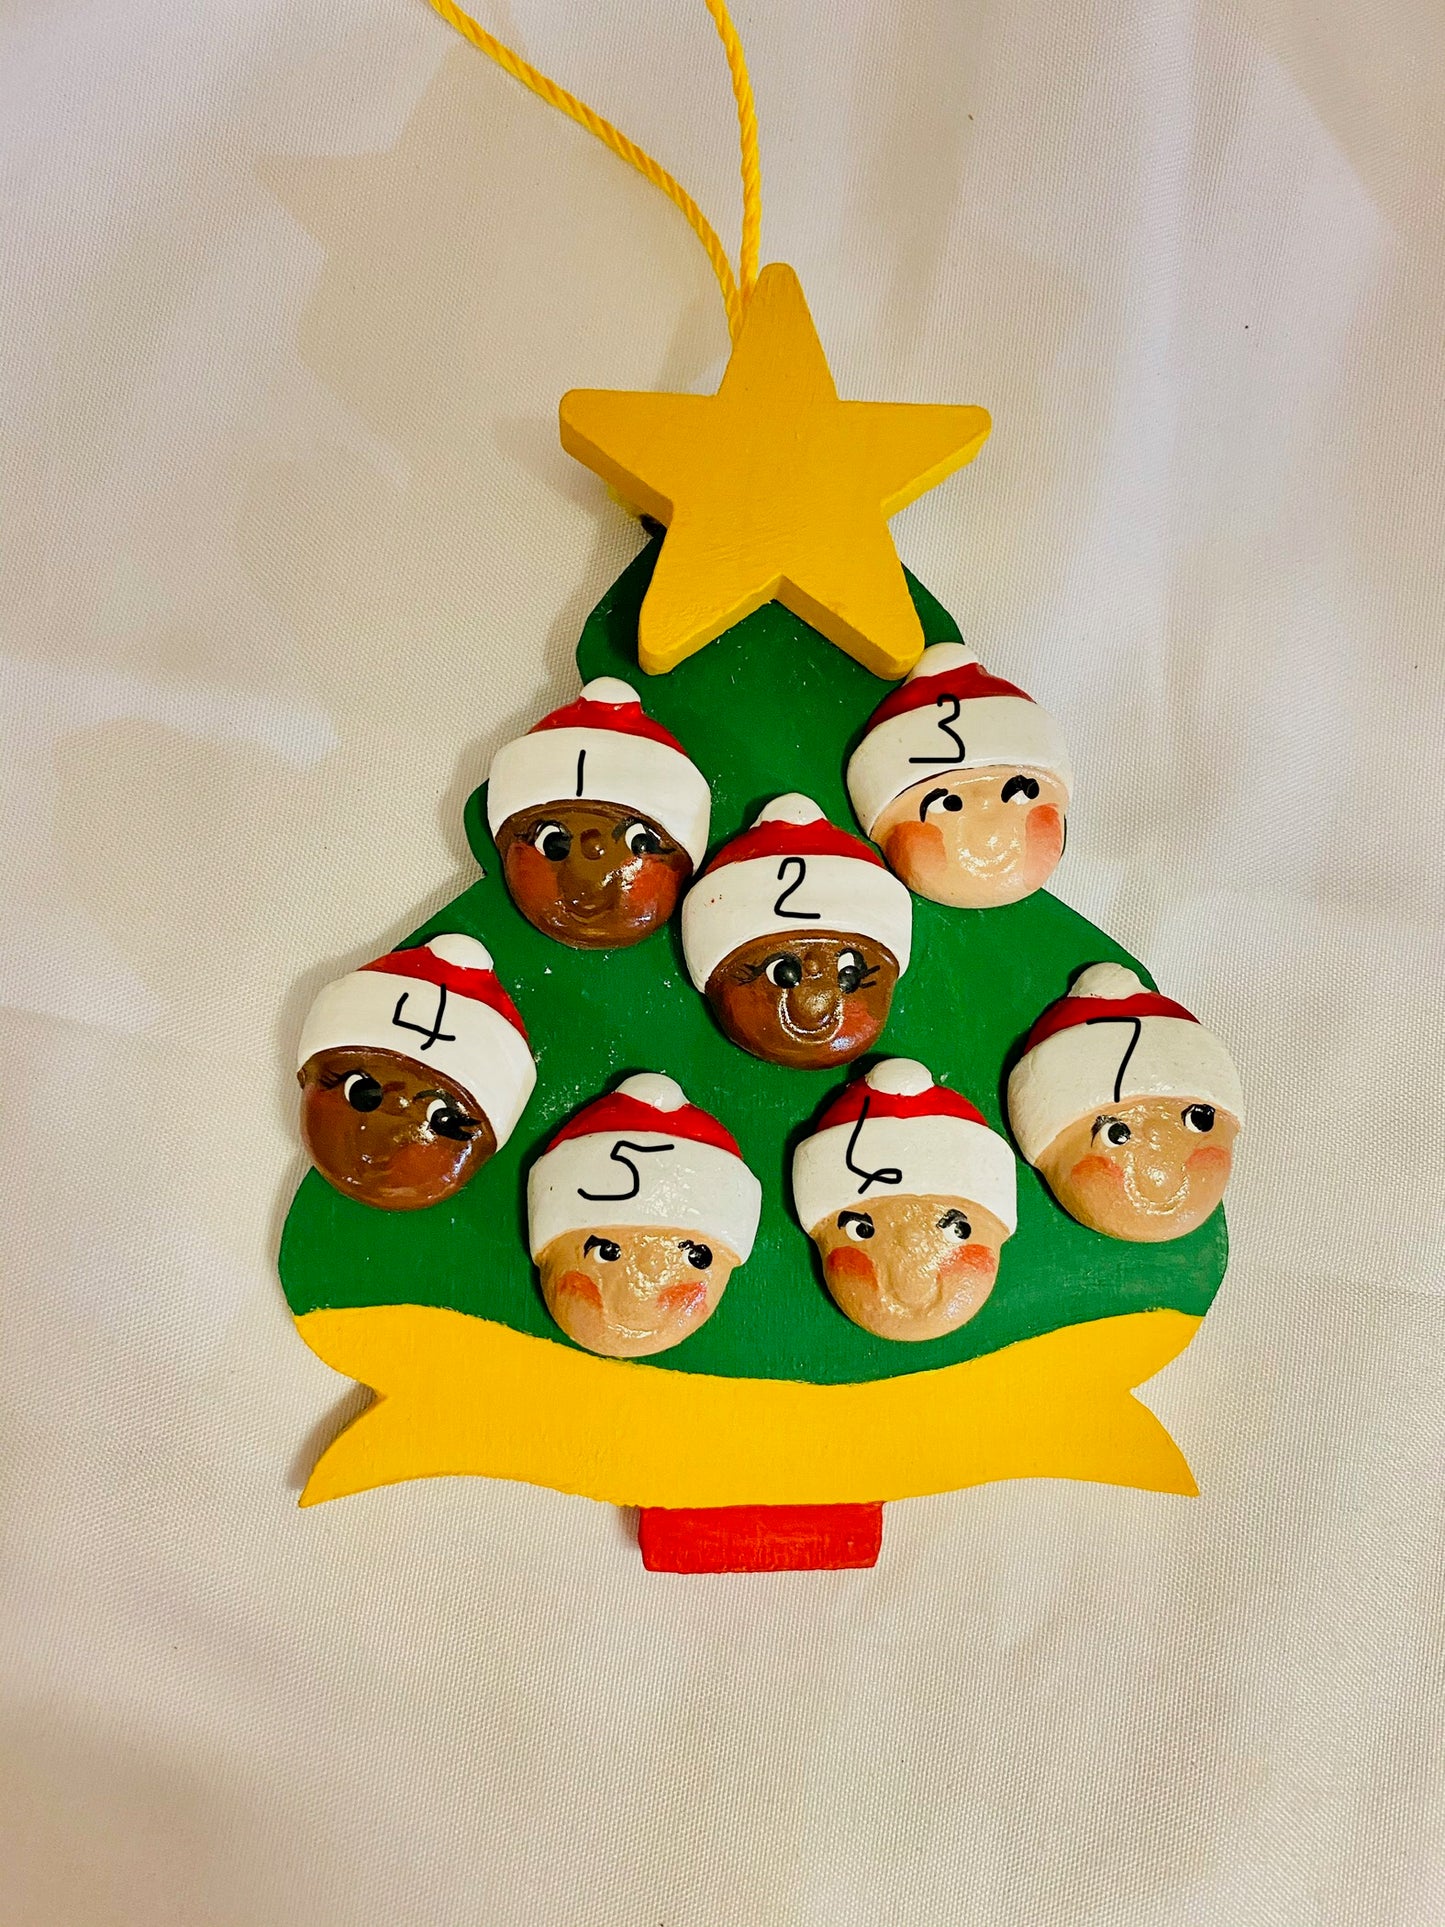 Personalized ornament 7 Santa Faces on a Christmas Tree  4.5" x 3.5"